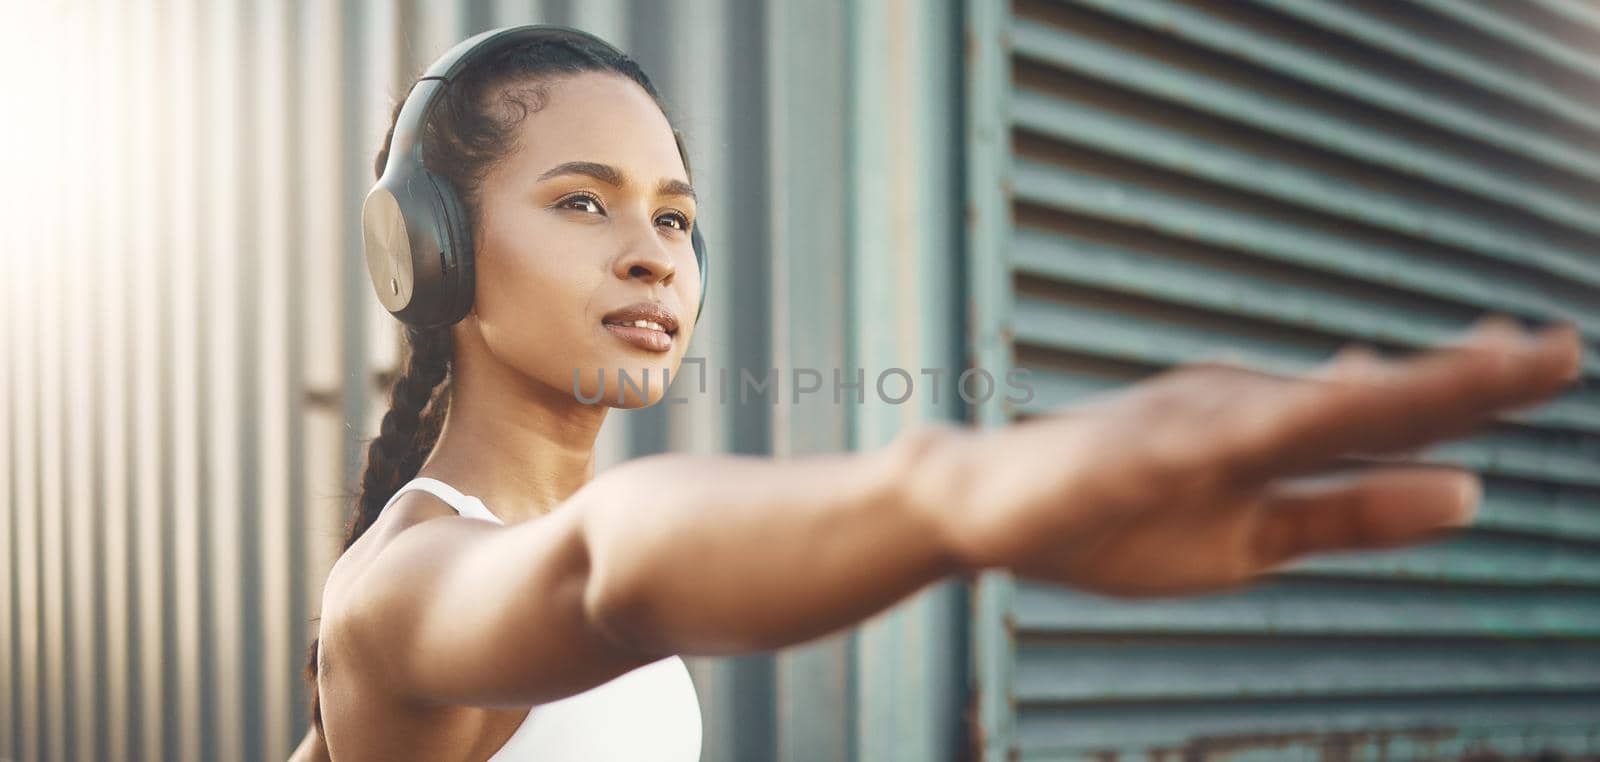 One fit young hispanic woman stretching arms in warrior pose for warmup to prevent injury while exercising in an urban setting outdoors. Focused and motivated female athlete listening to music with headphones while preparing body and mind for training workout or run by YuriArcurs